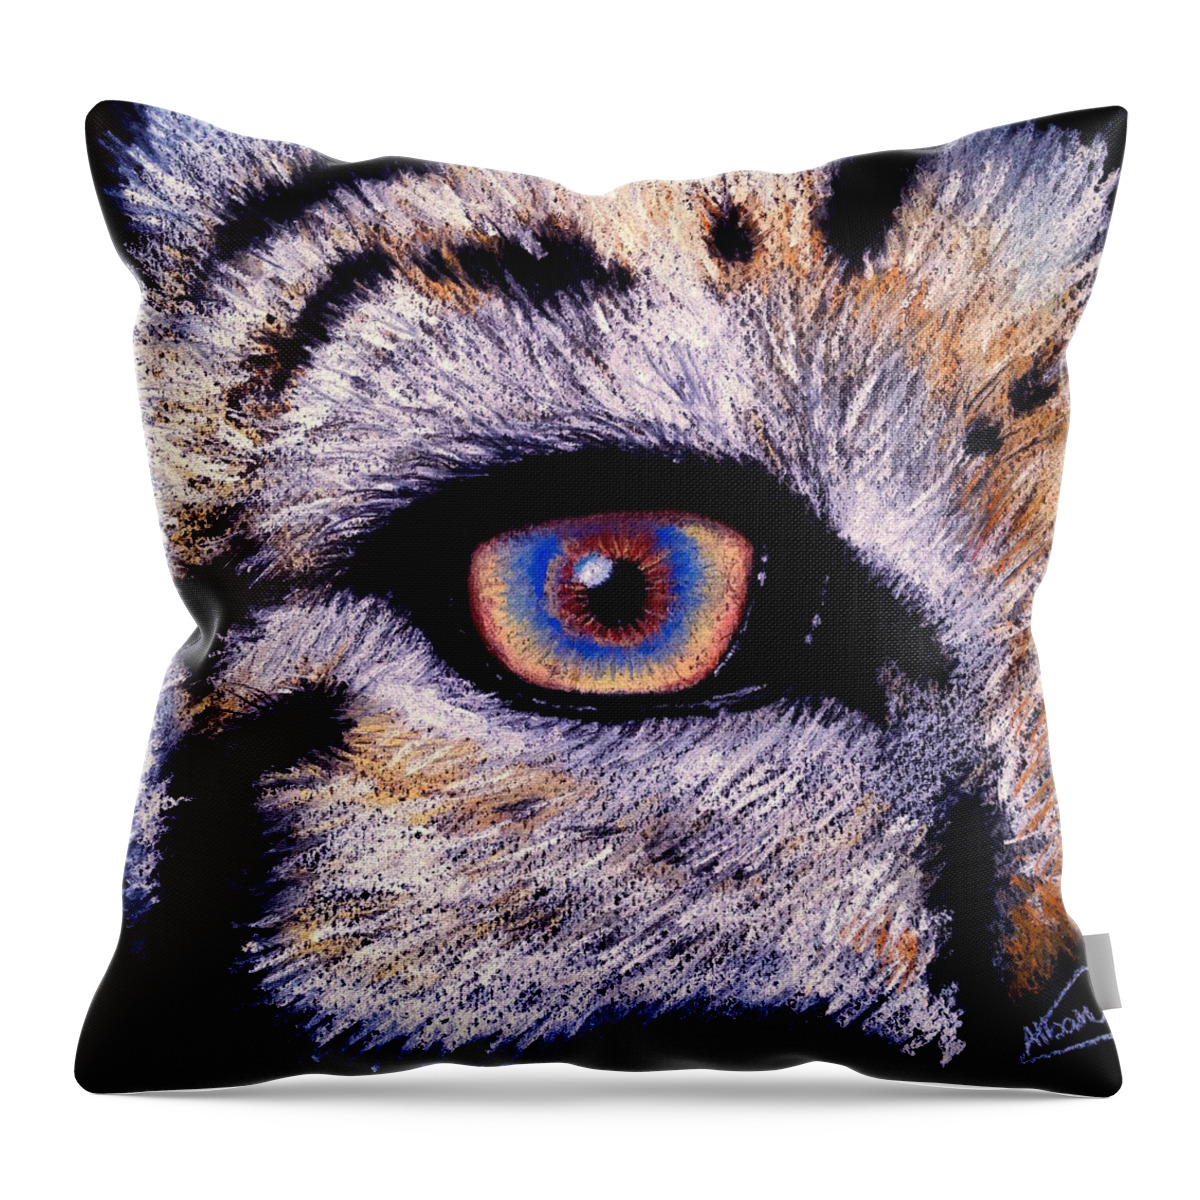 Tiger Throw Pillow featuring the drawing Eye of a Tiger by Alban Dizdari